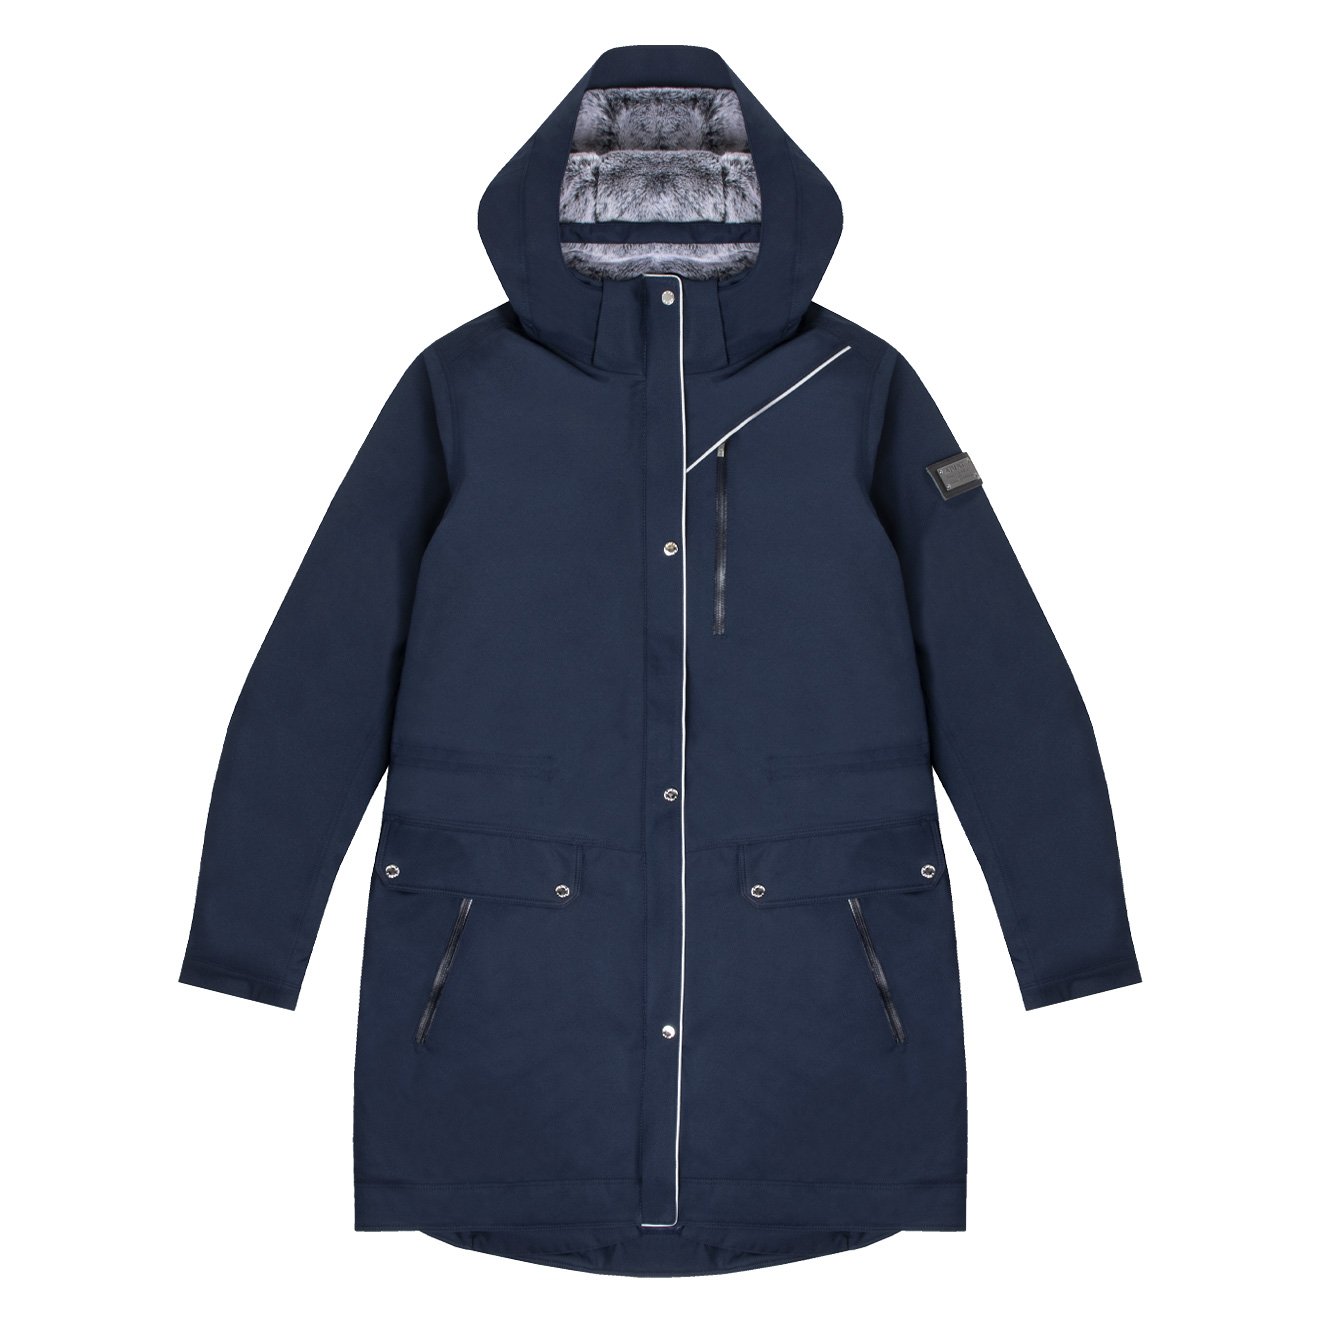 Ariat Tempest Waterproof Insulated Parka in Navy.jpg